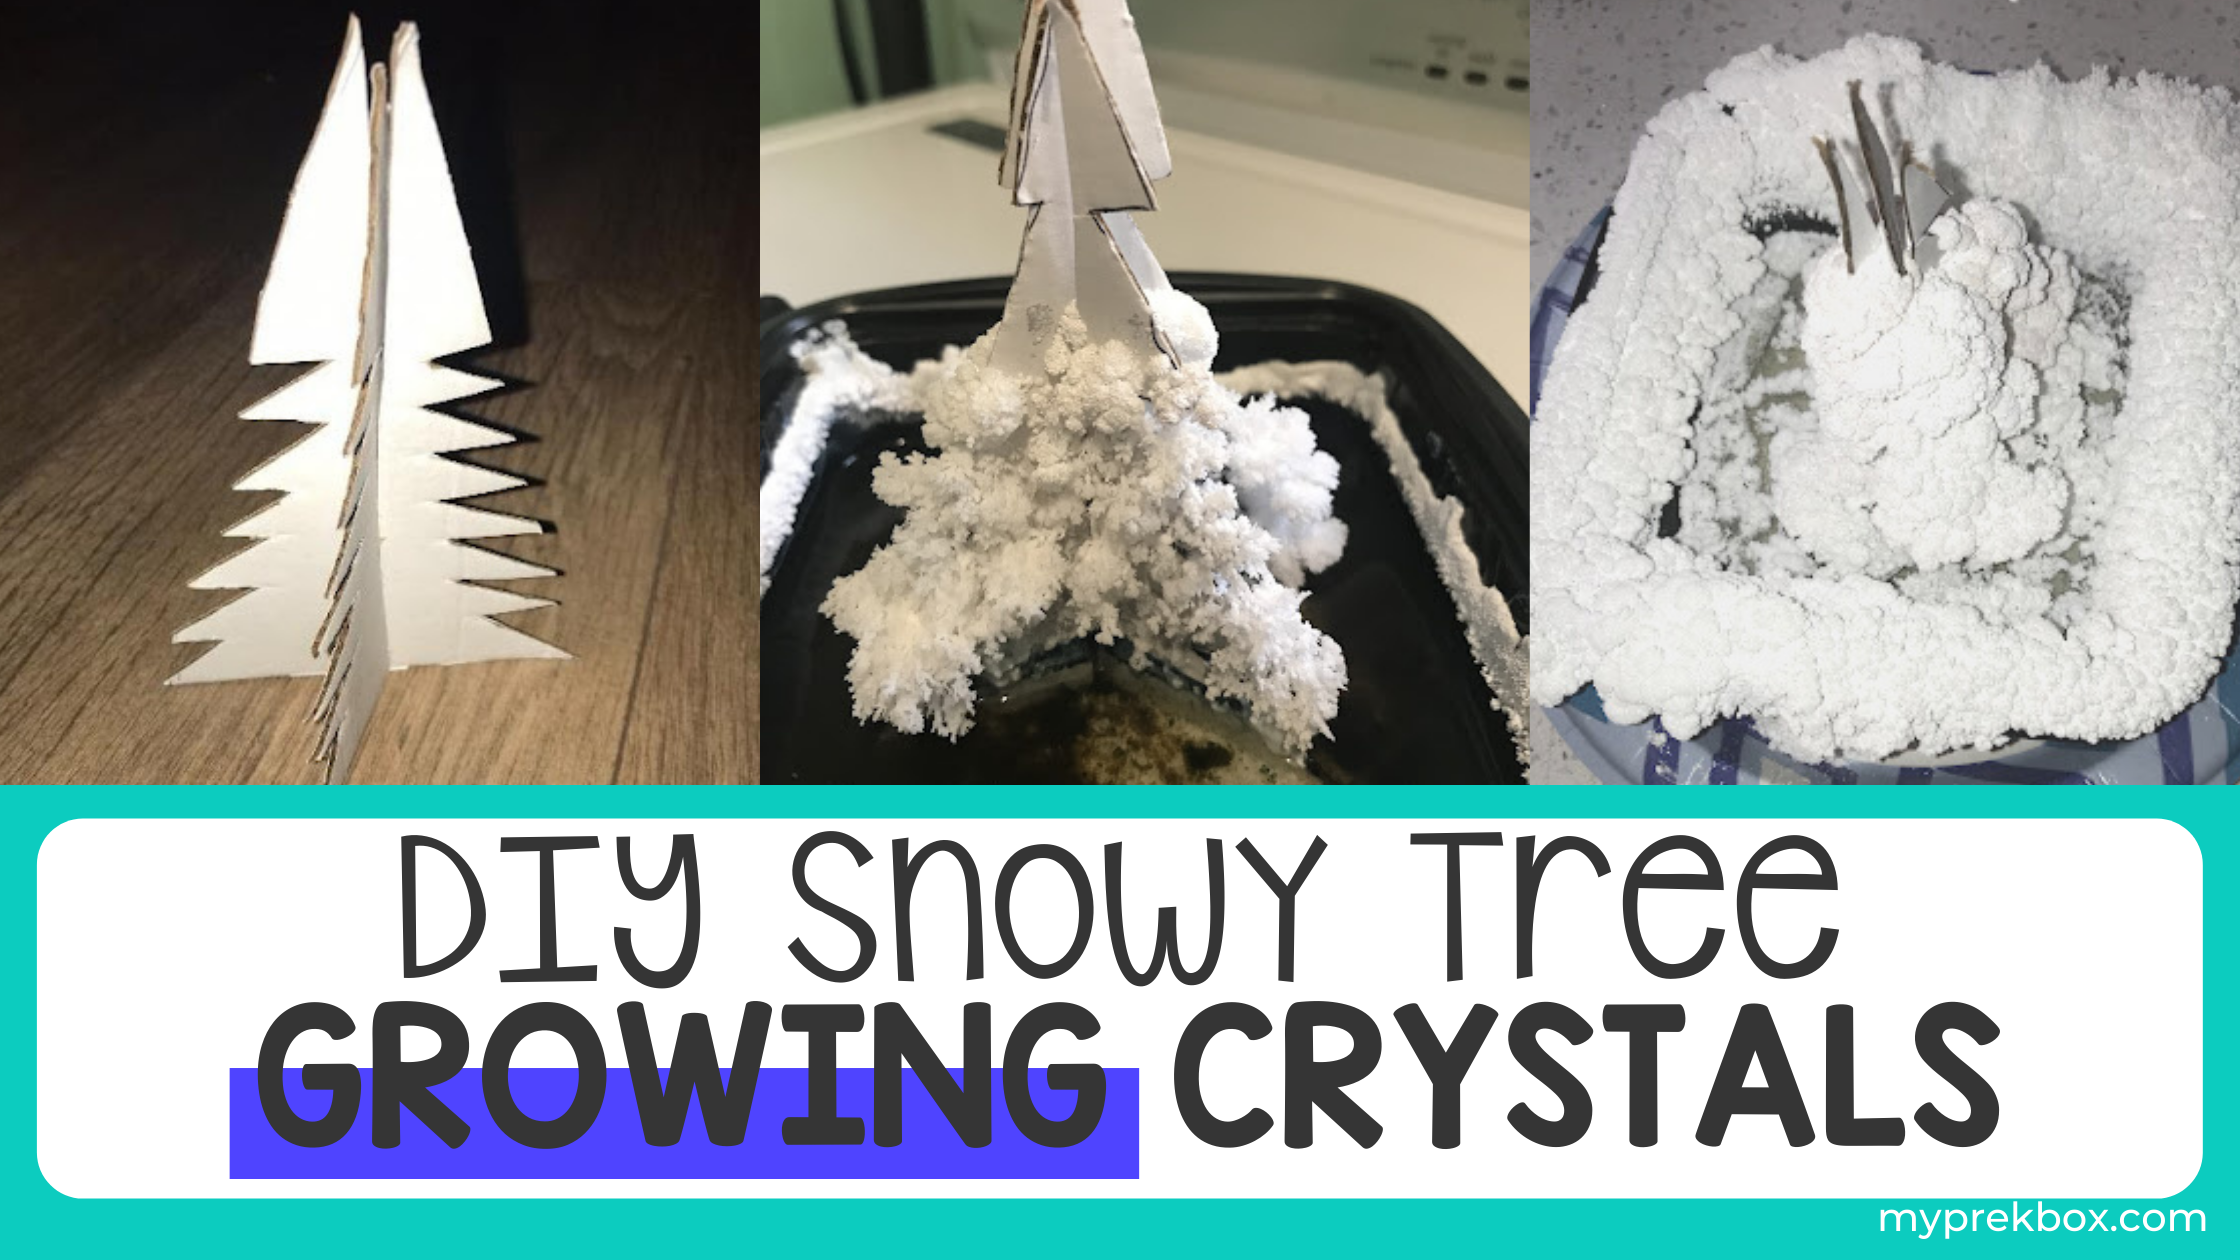 DIY Snowy Tree: A Growing Crystals Science Experiment